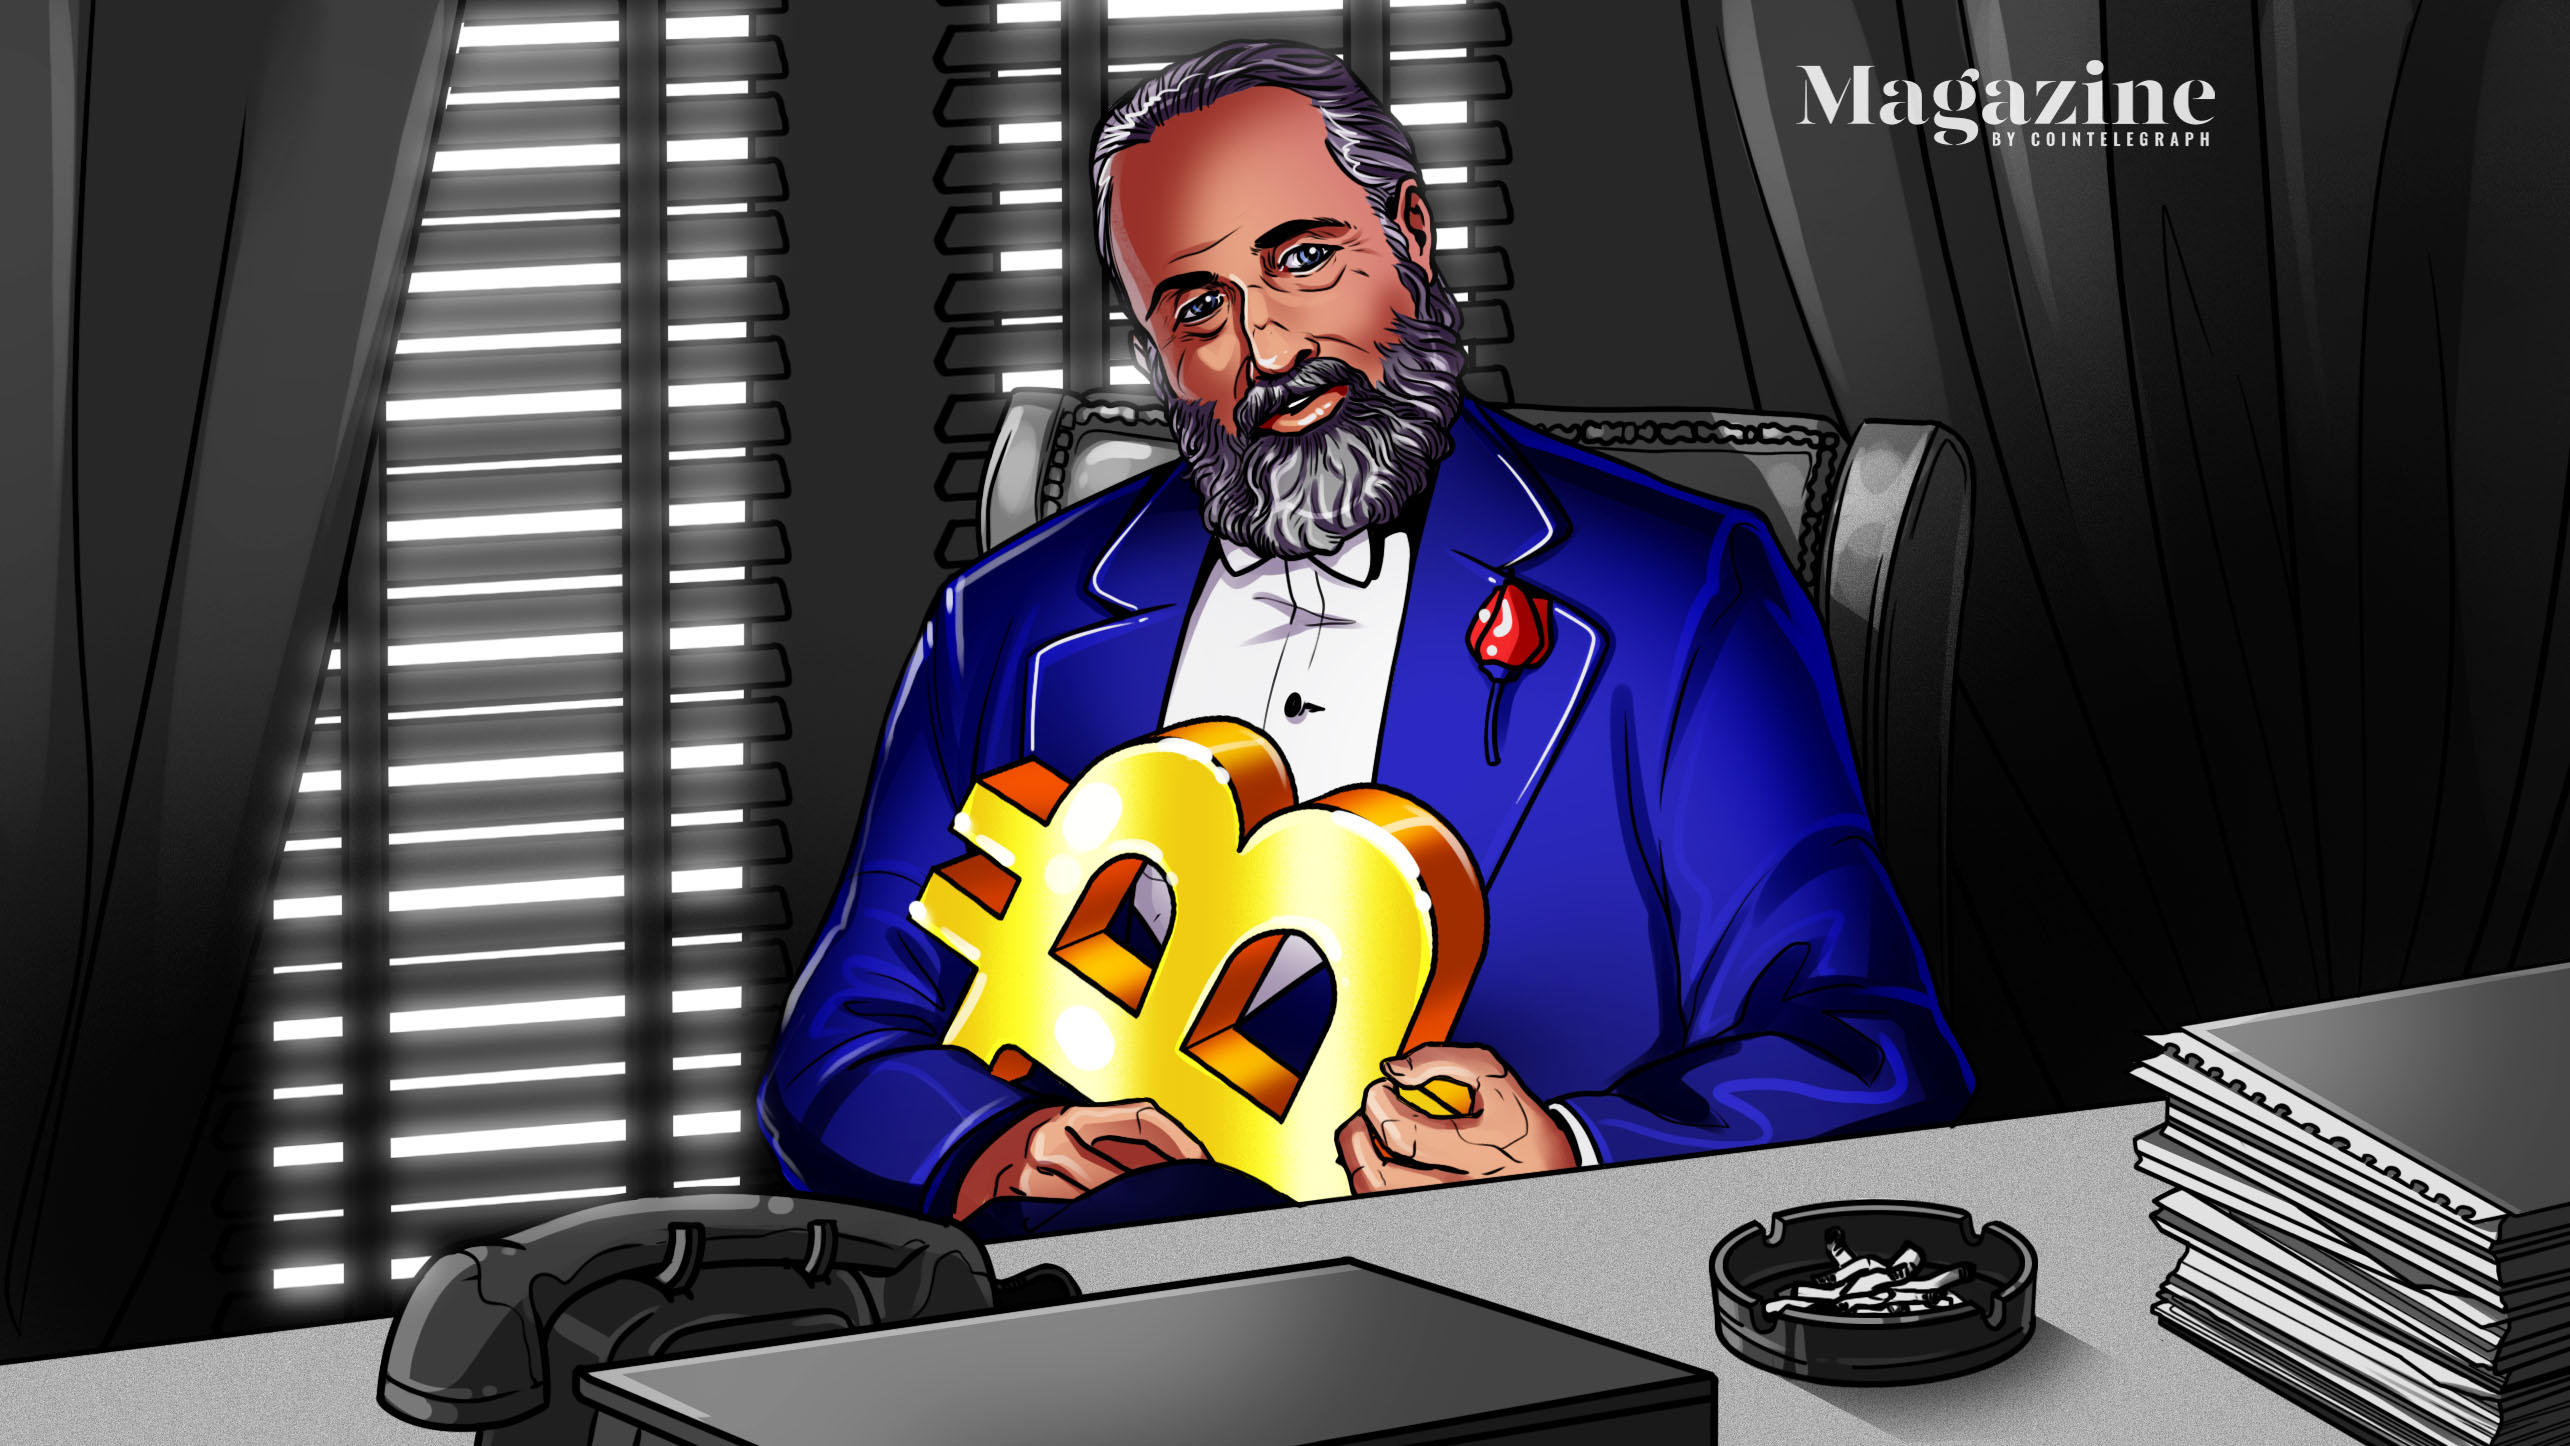 The ‘godfather of crypto’ risked lifetime in jail, laying foundation for Bitcoin – Cointelegraph Magazine